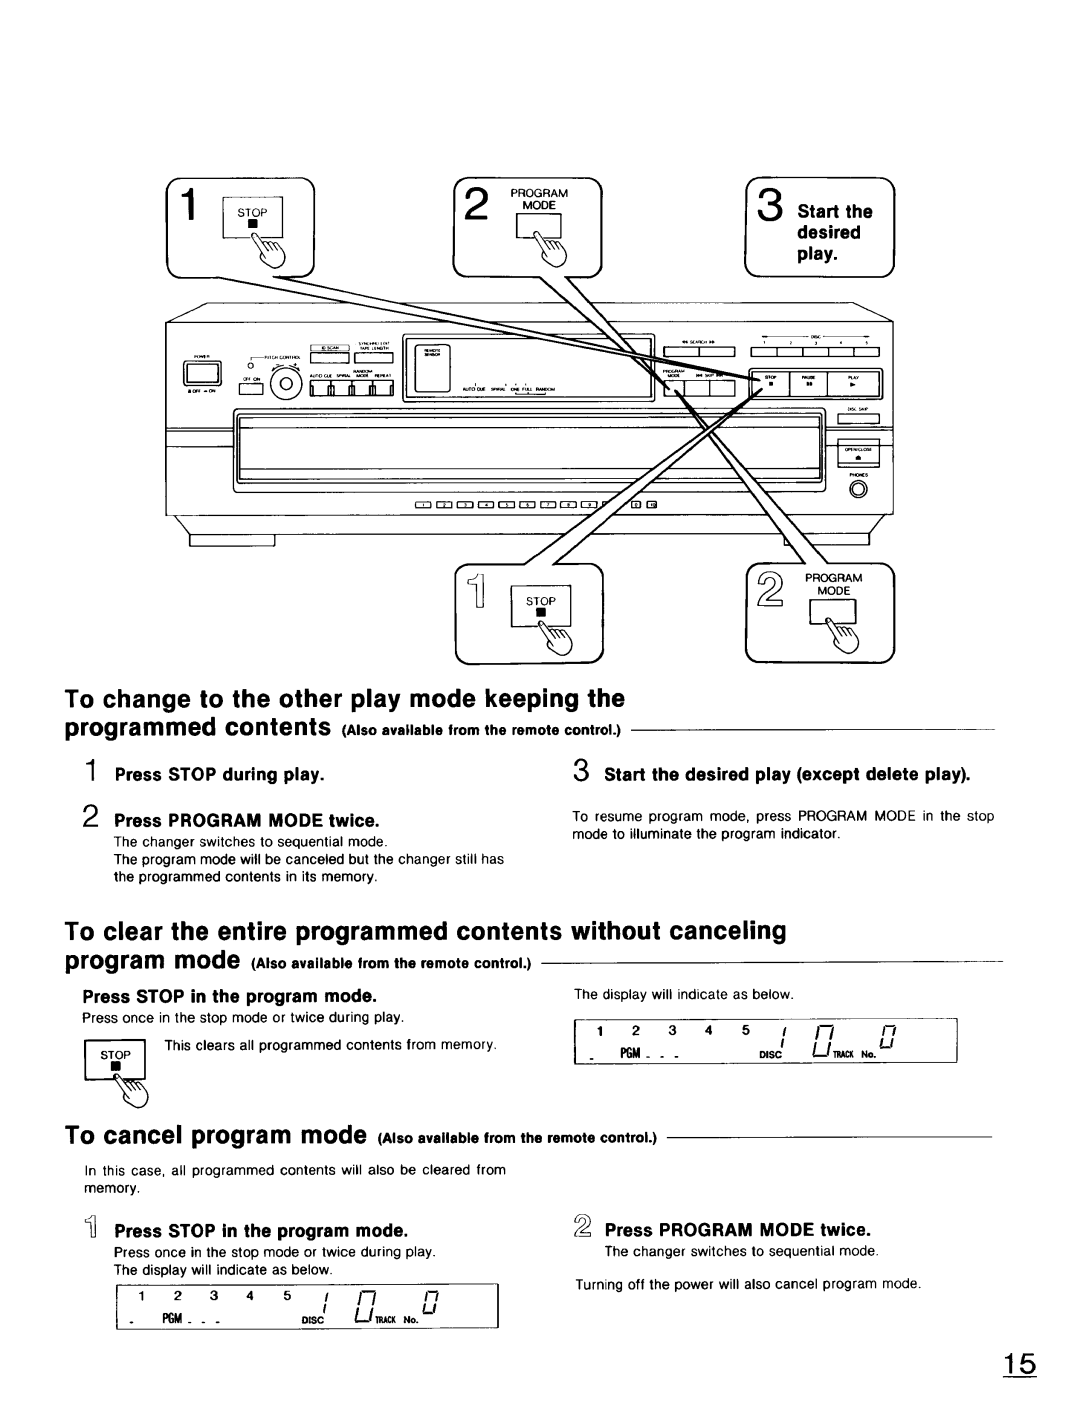 Technics SL-PD947 operating instructions To change to the other play mode keeping the 